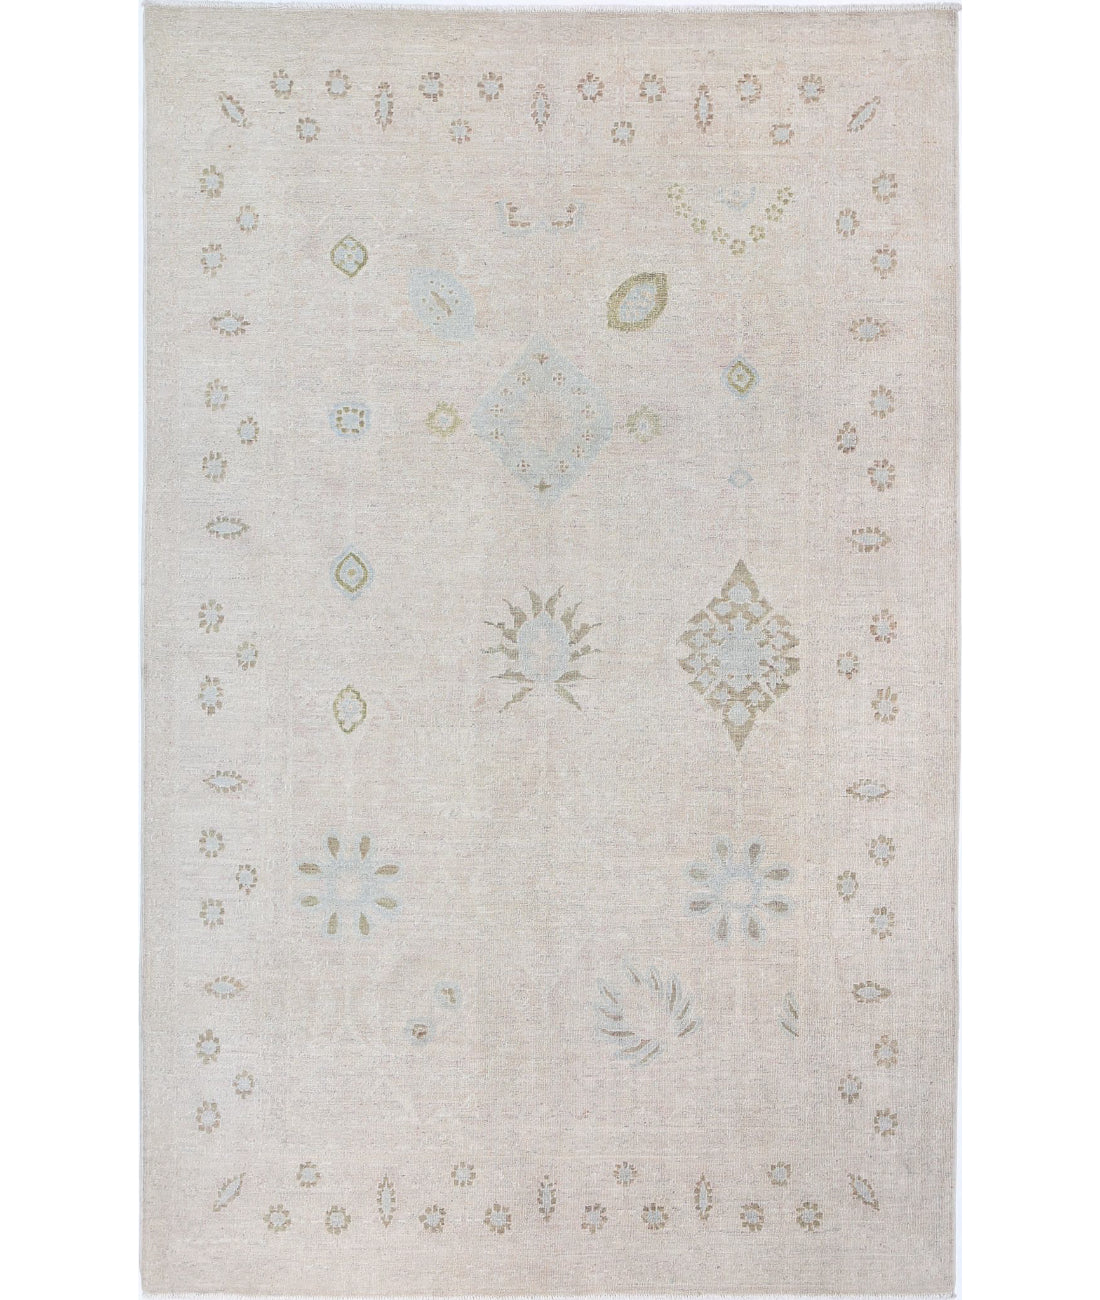 Hand Knotted Serenity Wool Rug - 4'9'' x 7'5'' 4'9'' x 7'5'' (143 X 223) / Taupe / Ivory